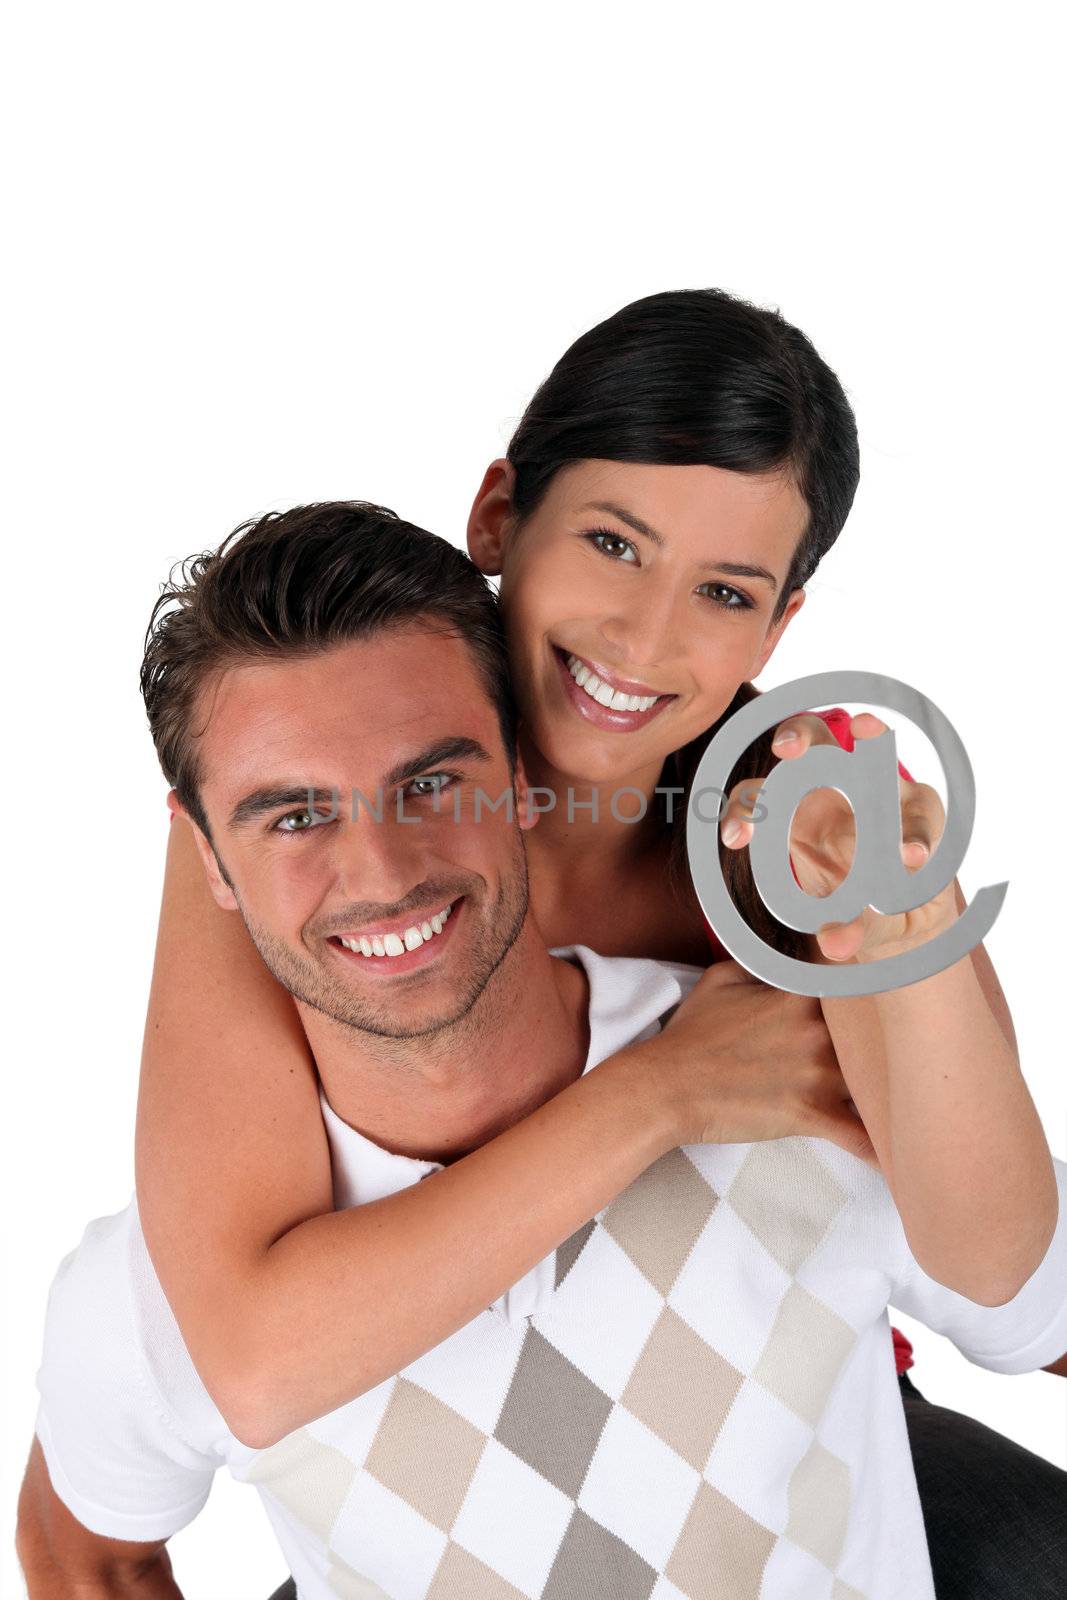 Couple holding an at symbol